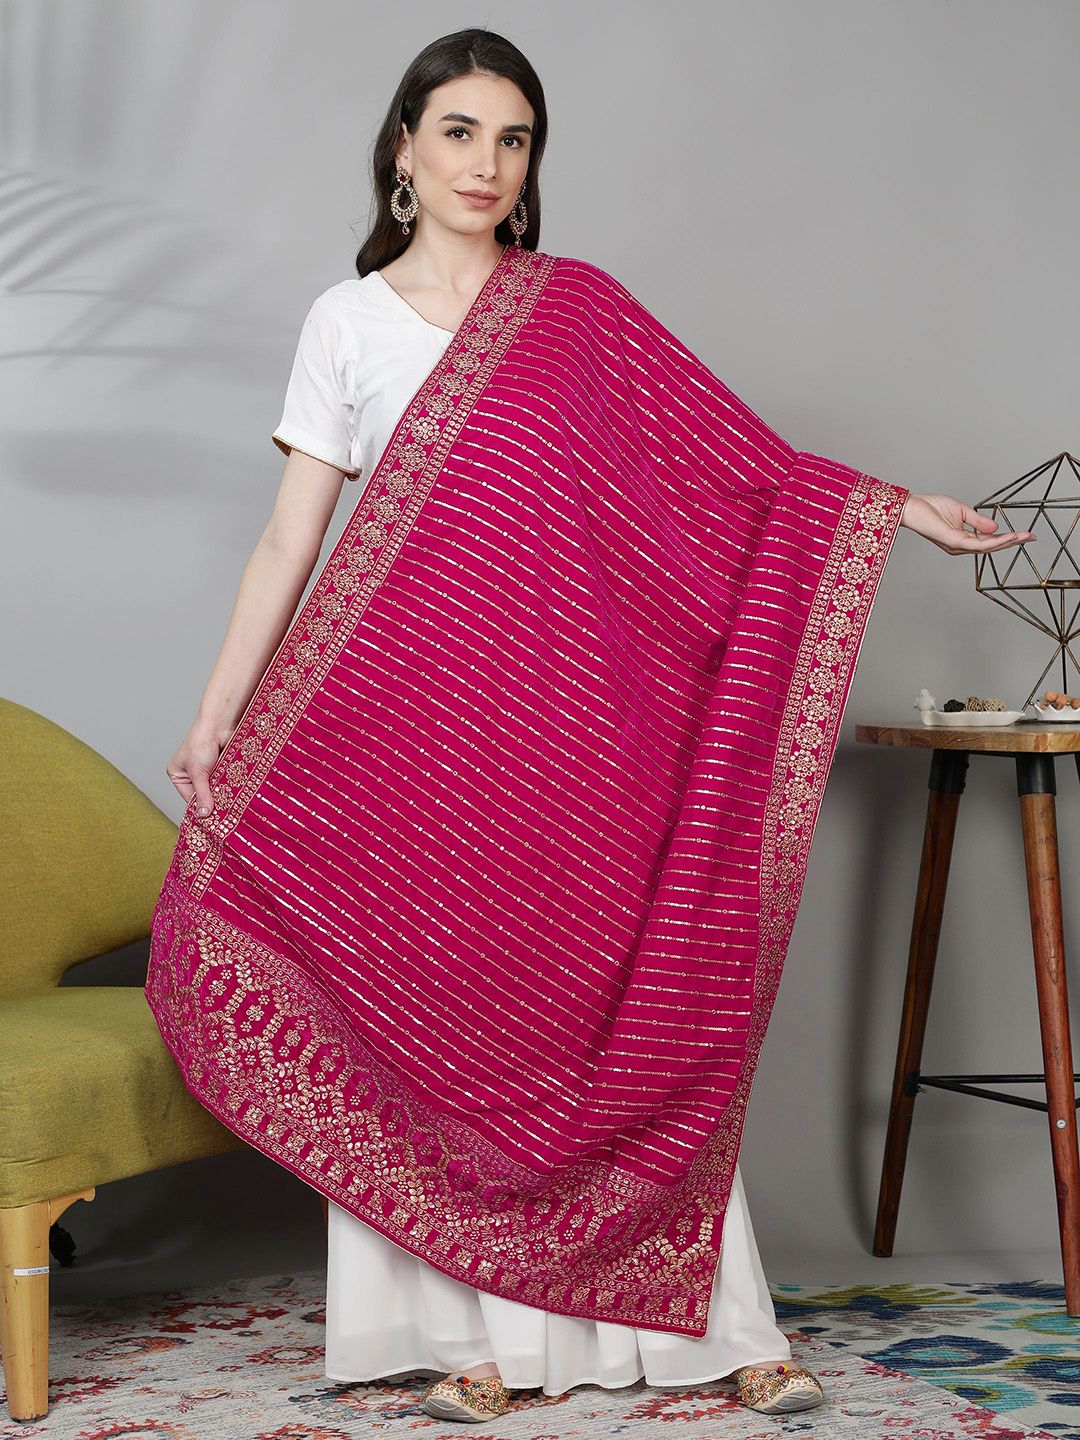 Moda Chales Magenta & Gold-Toned Ethnic Motifs Embroidered Velvet Dupatta with Sequinned Price in India